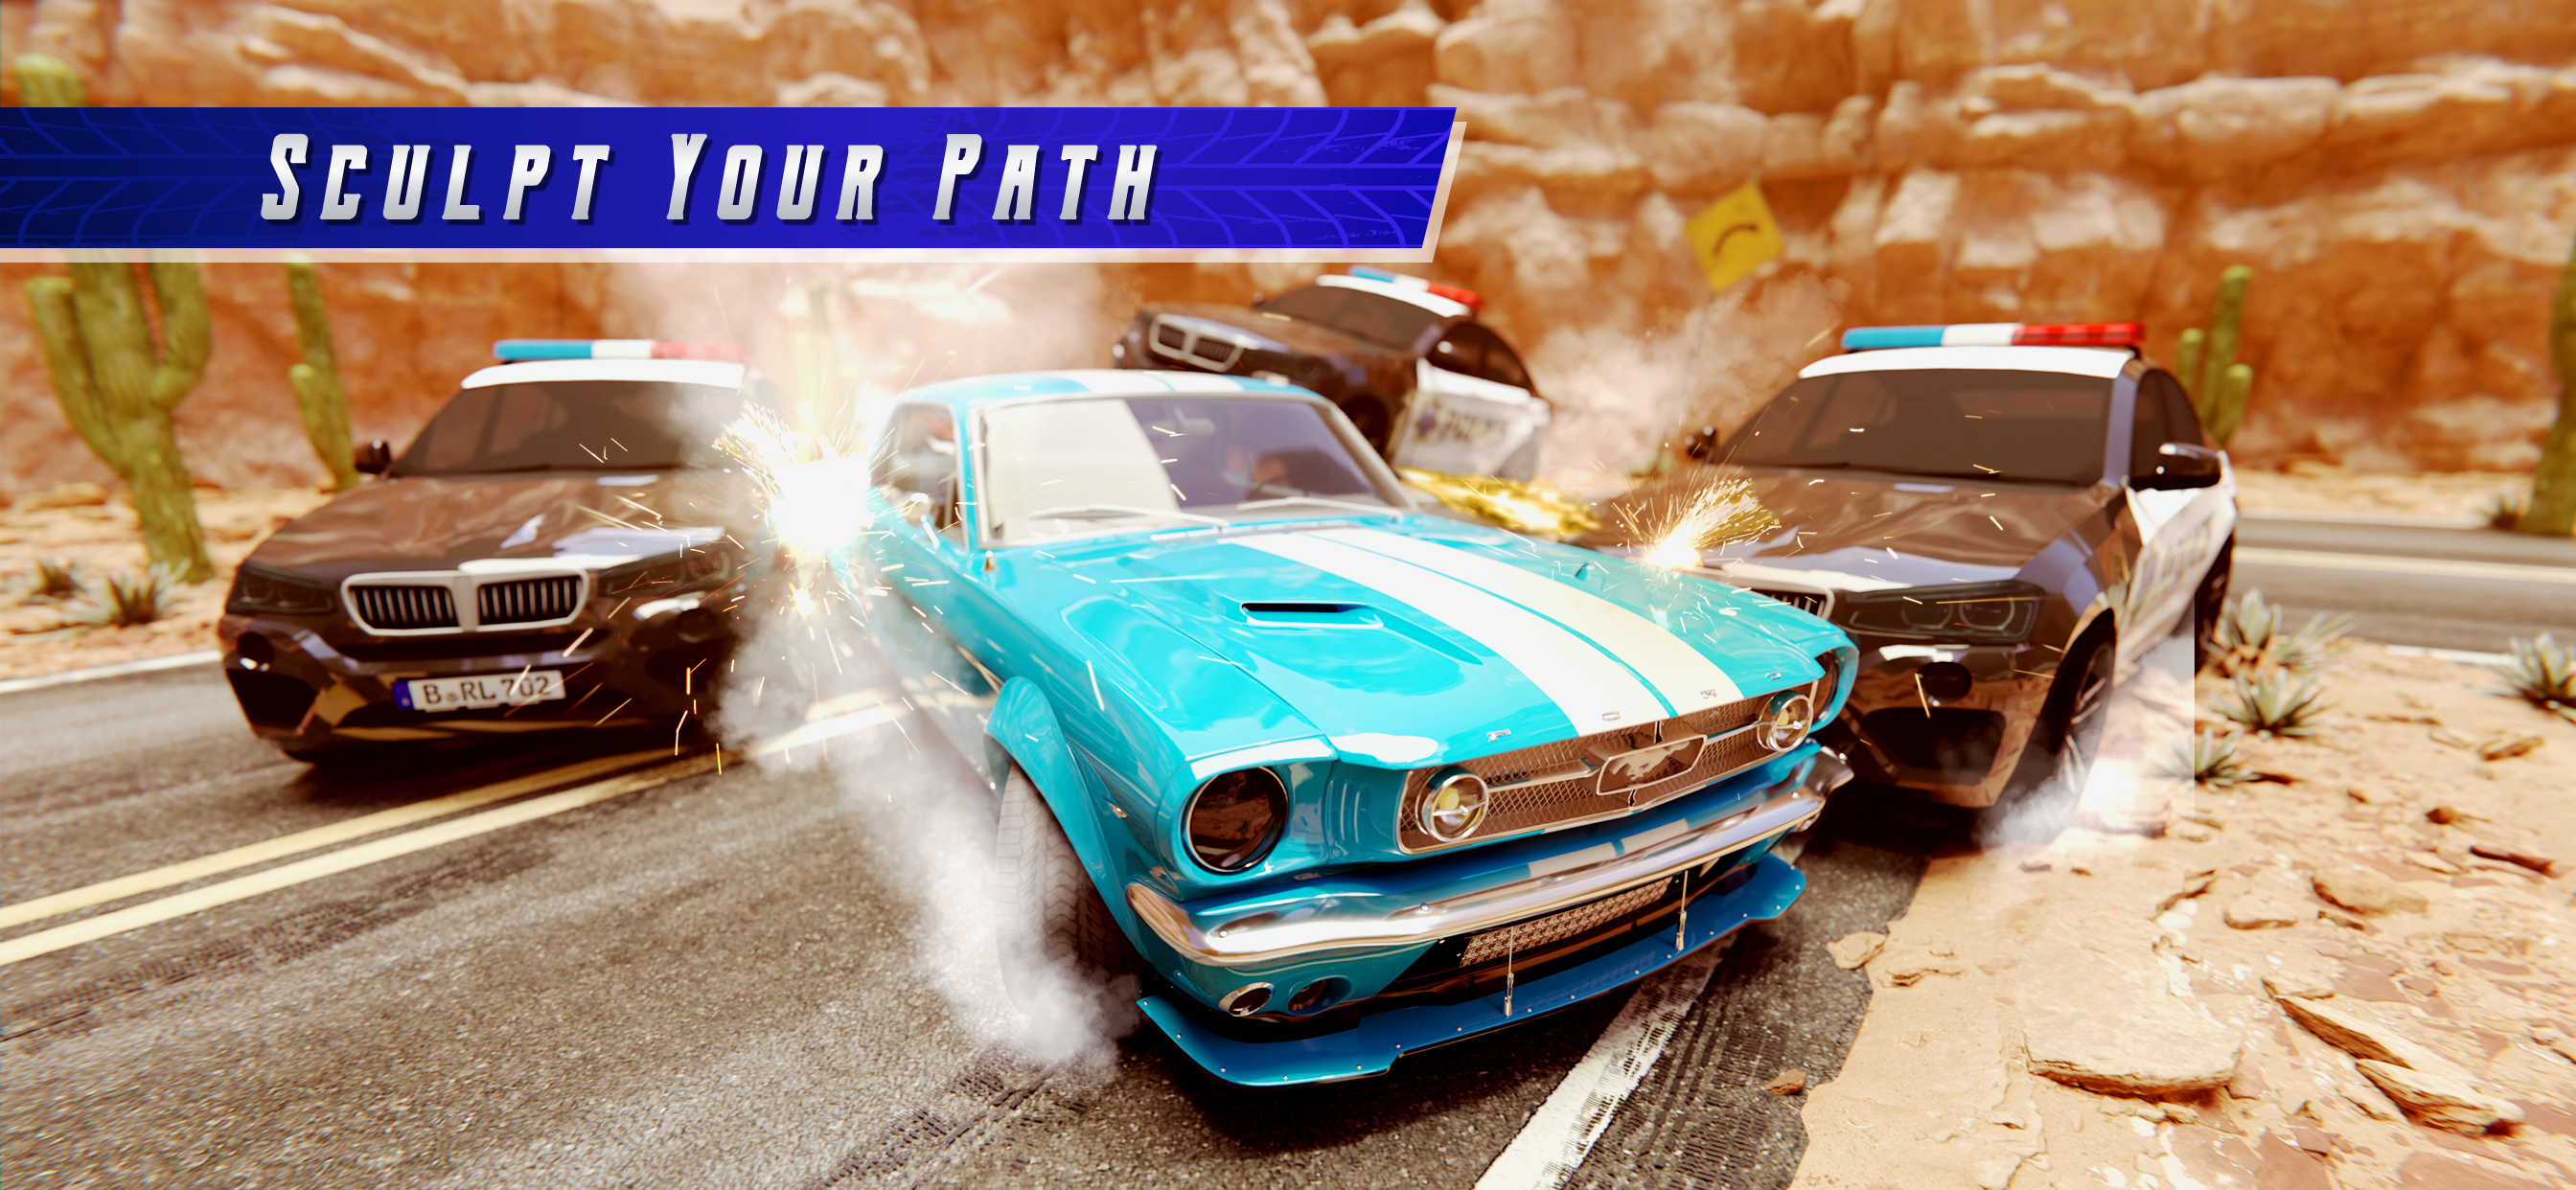 Car Drifting Games: Drift Ride APK for Android Download